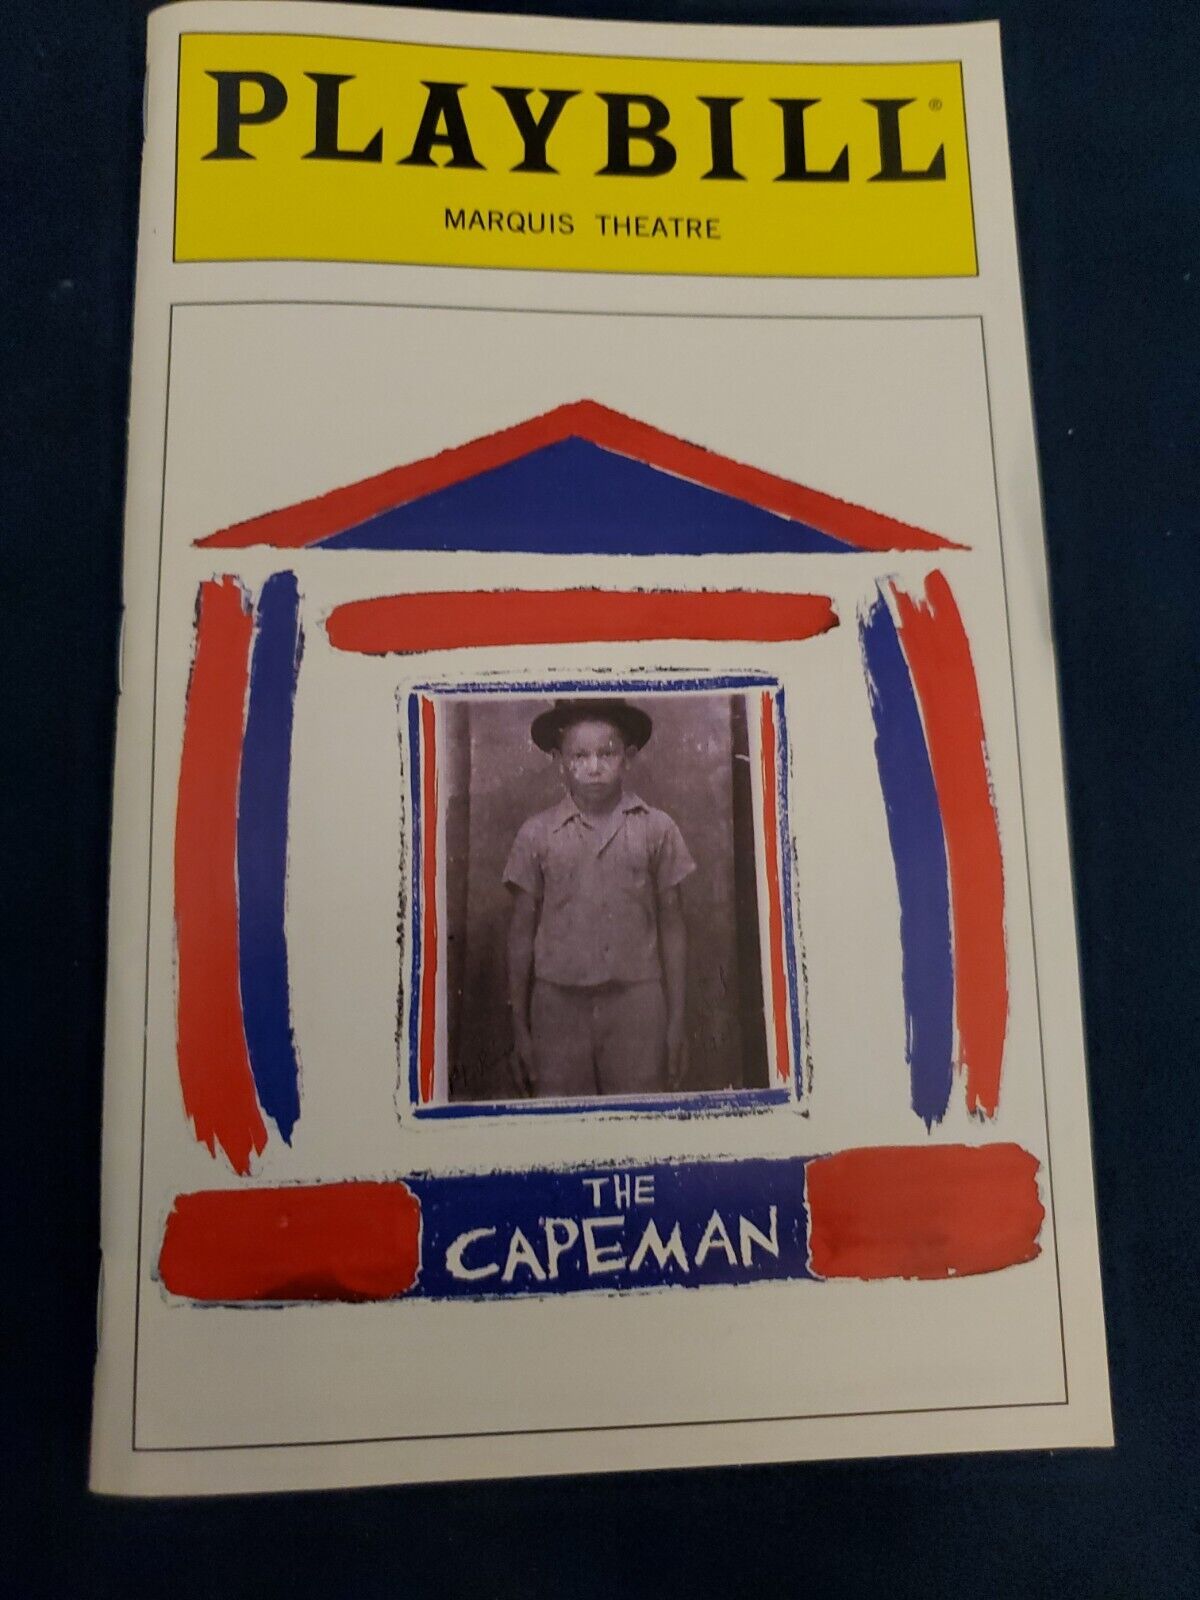 Playbill The Capeman  - The Musical Marc Anthony